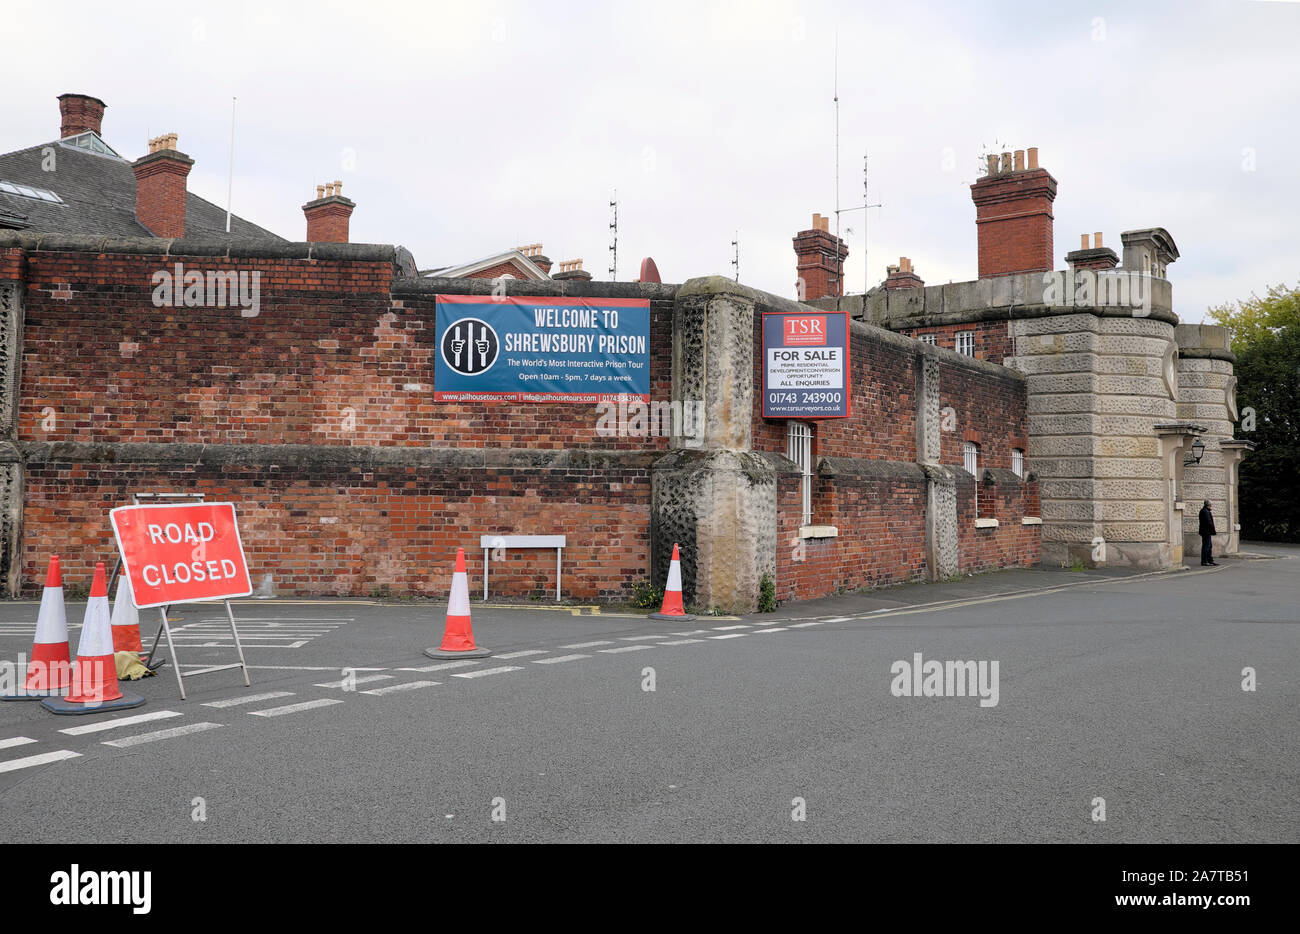 Property for sale sign on the outsde wall of Shrewsbury prison building exterior  England UK    KATHY DEWITT Stock Photo